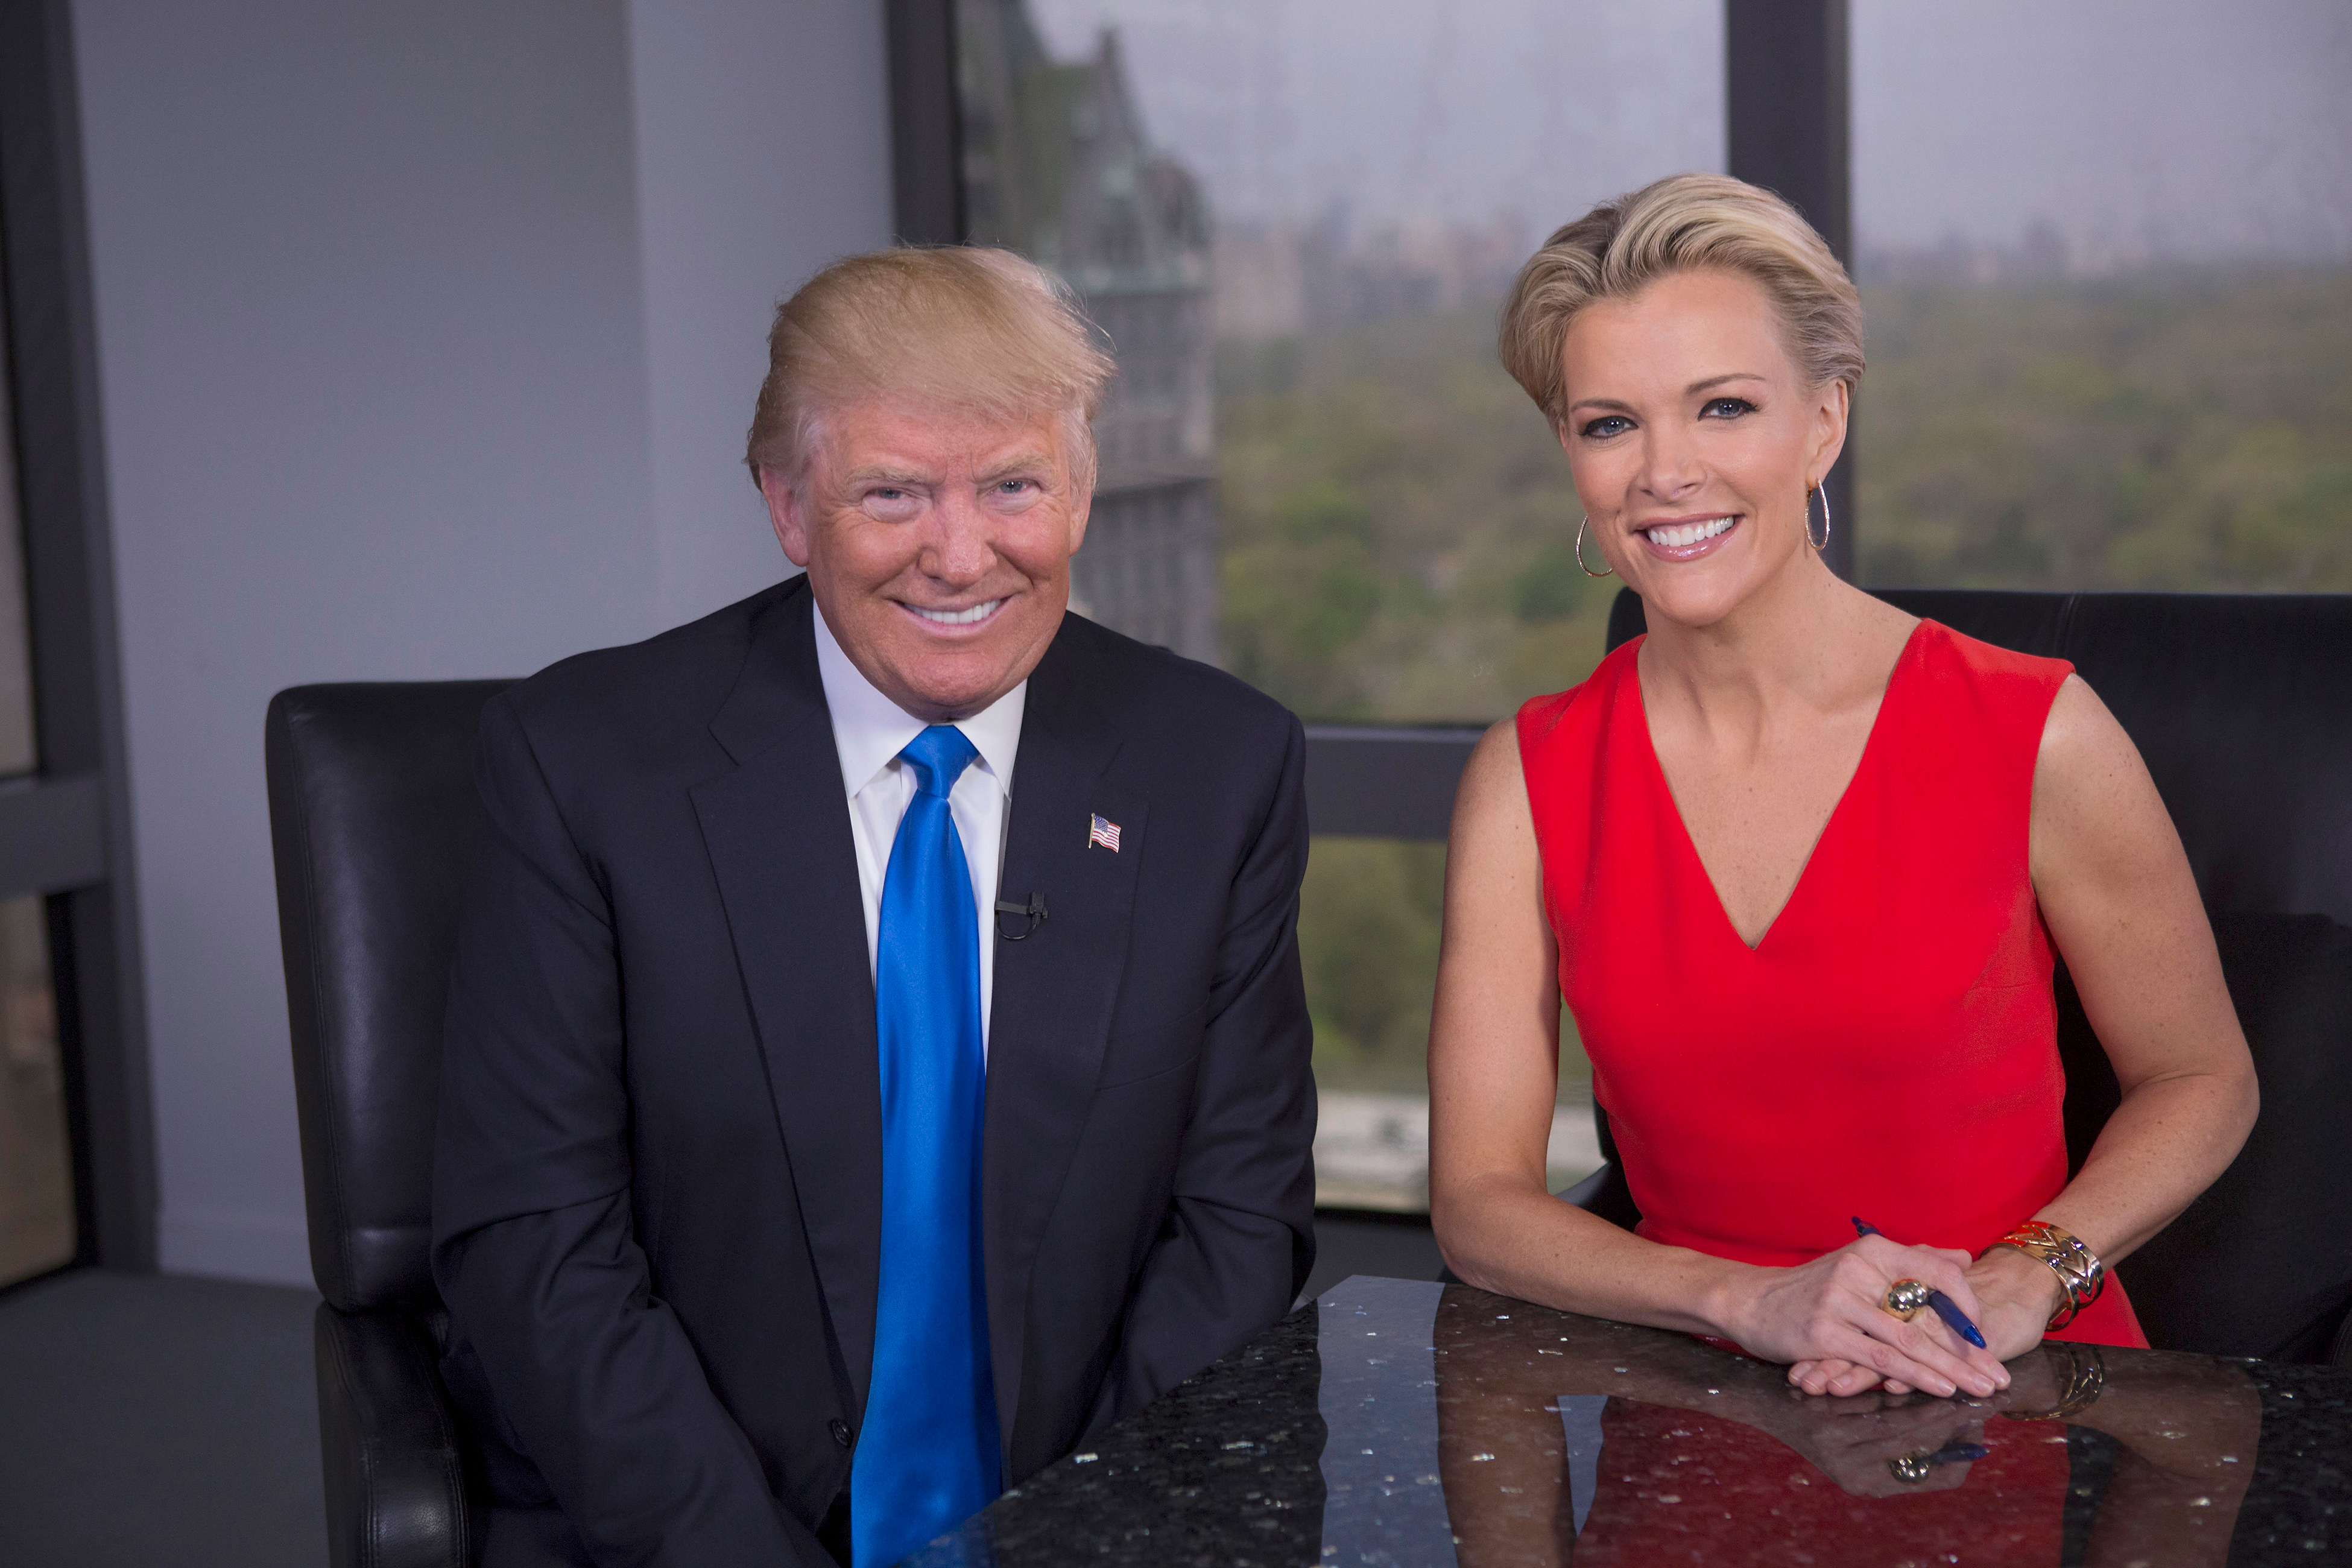 Megyn Kelly (R) and Donald Trump (L) during the FOX special, which aired May 17. (Eric Liebowitz—FOX/Getty Images)